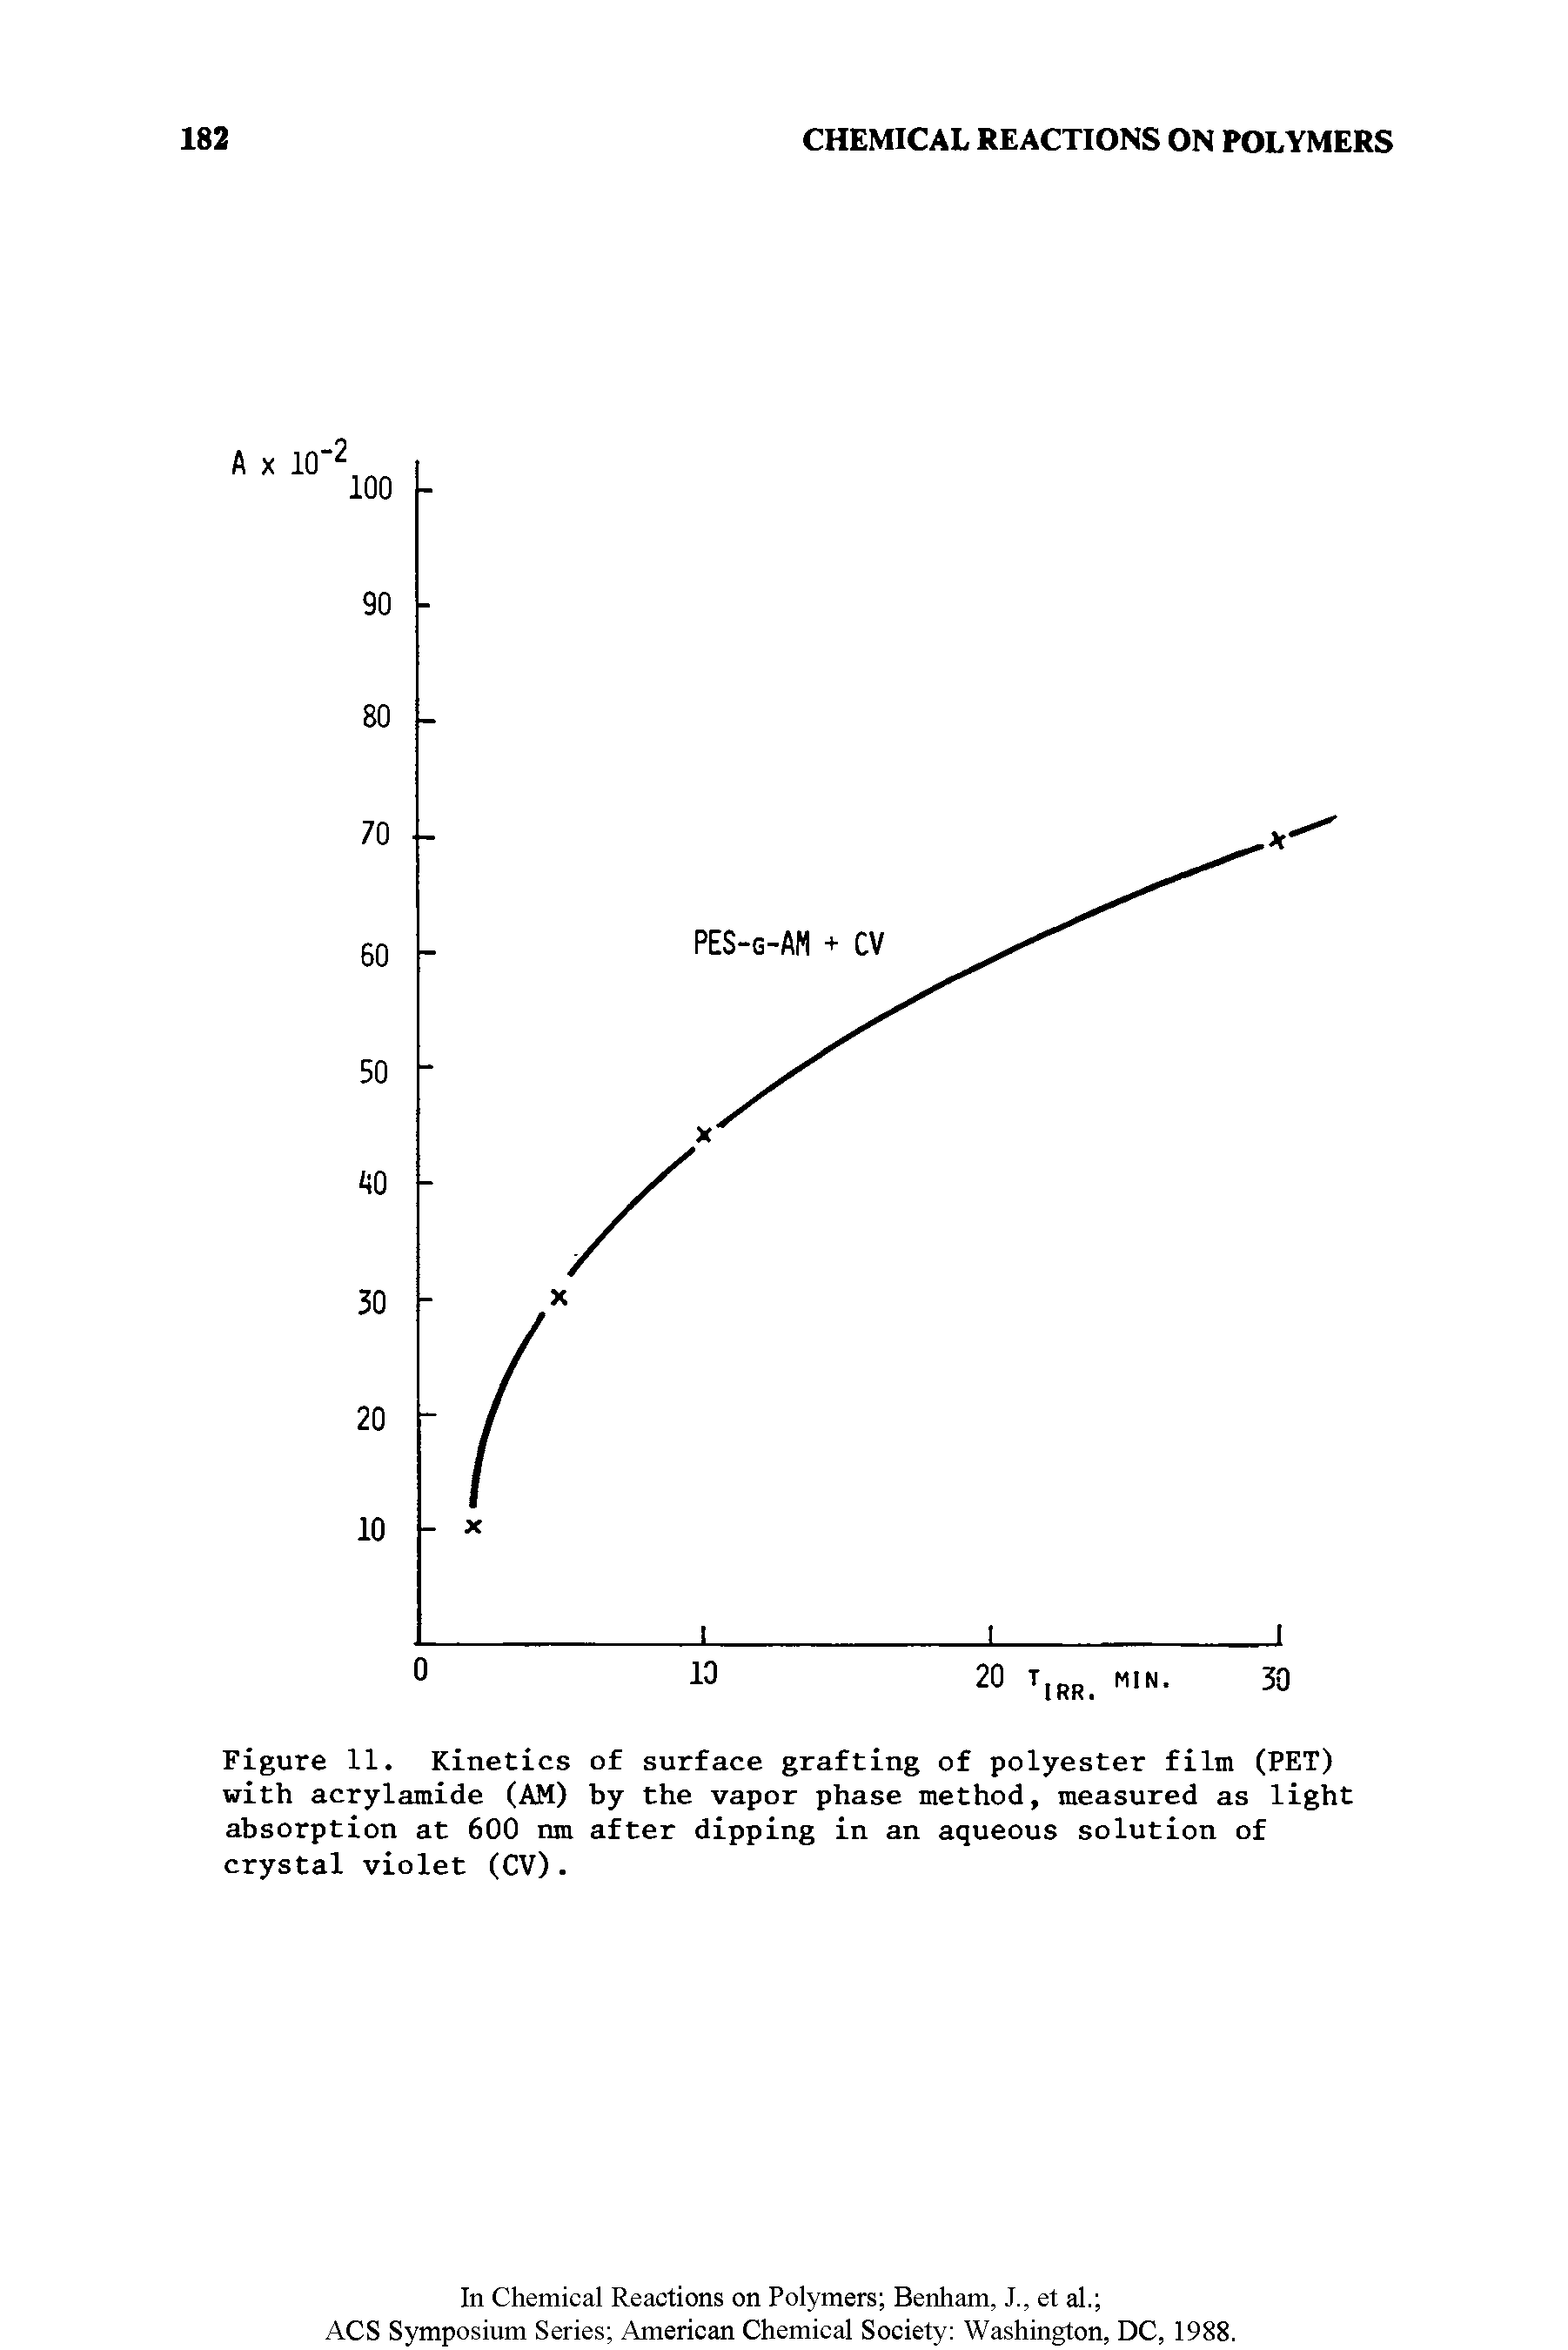 Figure 11. Kinetics of surface grafting of polyester film (PET) with acrylamide (AM) by the vapor phase method, measured as light absorption at 600 nm after dipping in an aqueous solution of crystal violet (CV).